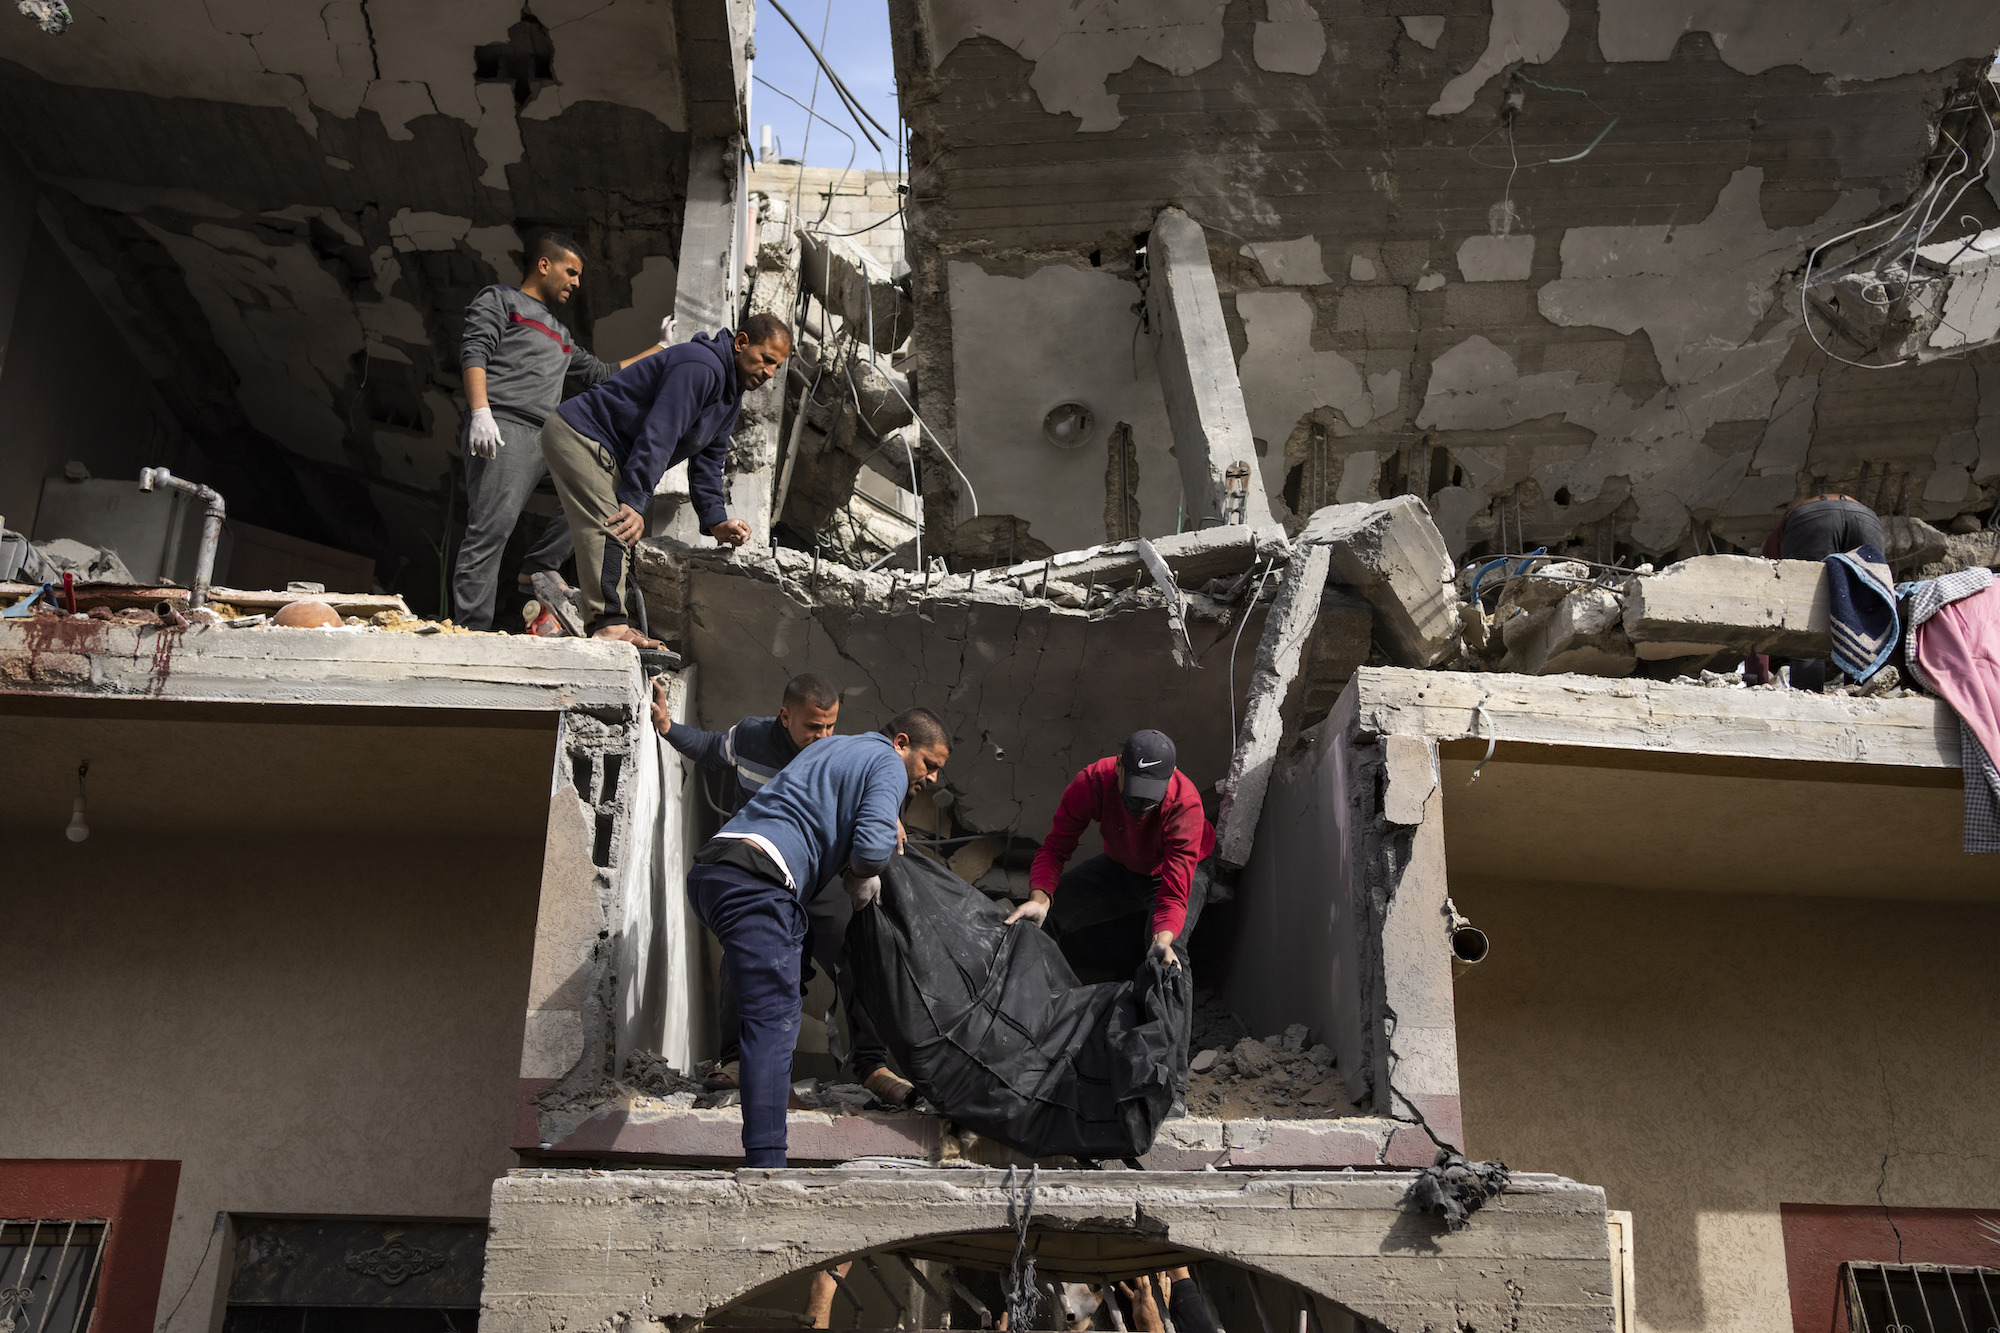 Palestinians carry the body of a woman found under the rubble of a destroyed building following an Israeli airstrike in Rafah, Gaza, on Wednesday.